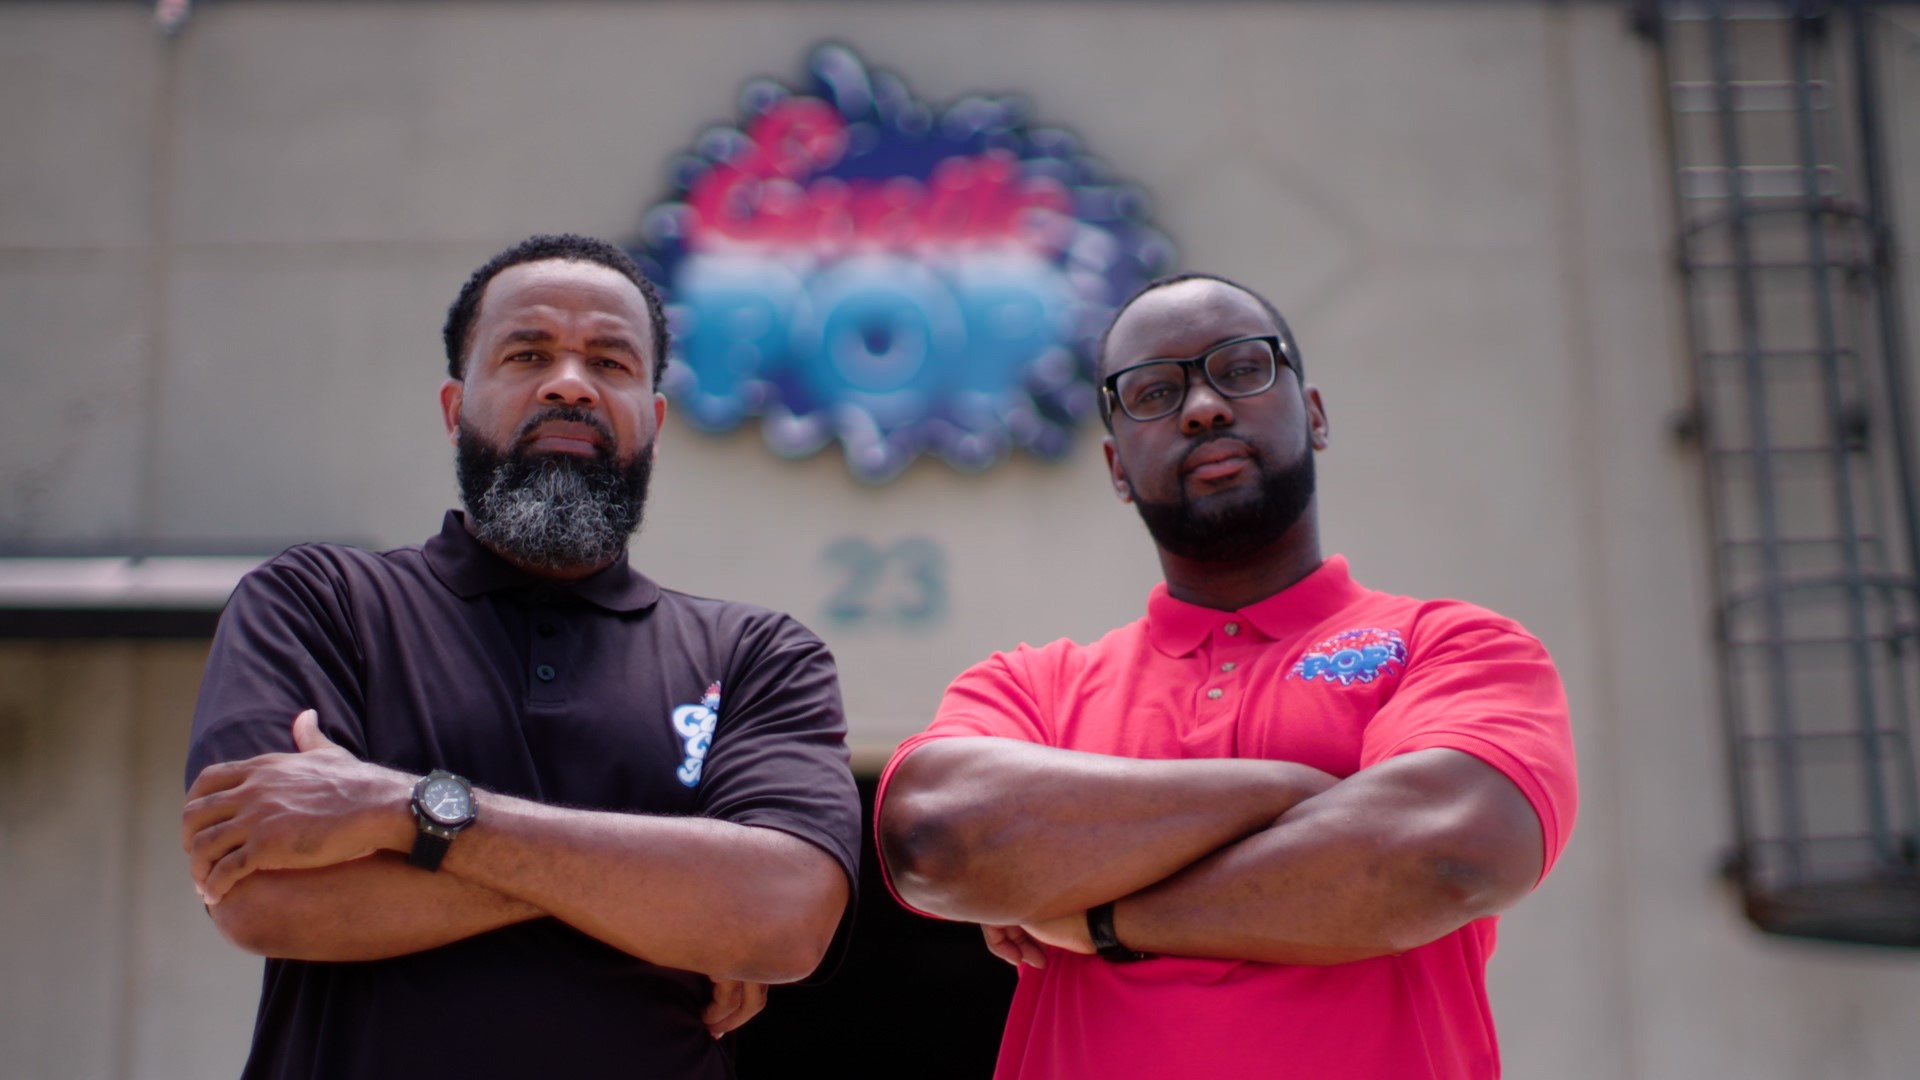 When Charleston Wilson began purchasing sodas exclusive to Louisiana and reselling them at a Houston barber shop, he didn’t know what he was creating.